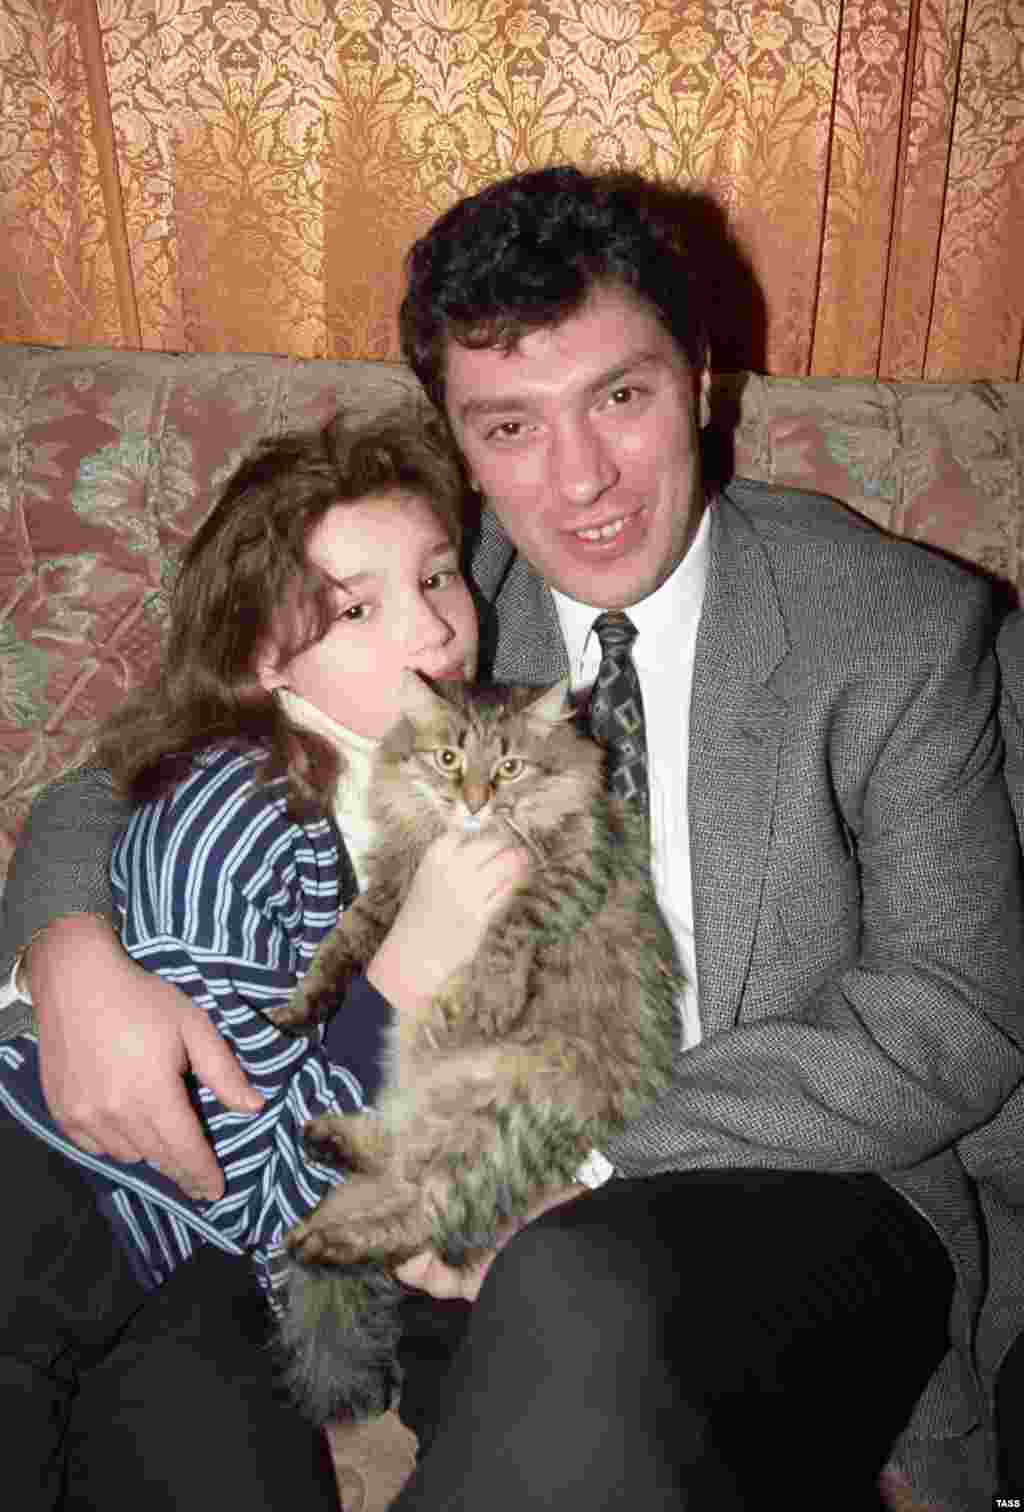 Nemtsov with his daughter Zhanna in 1996.